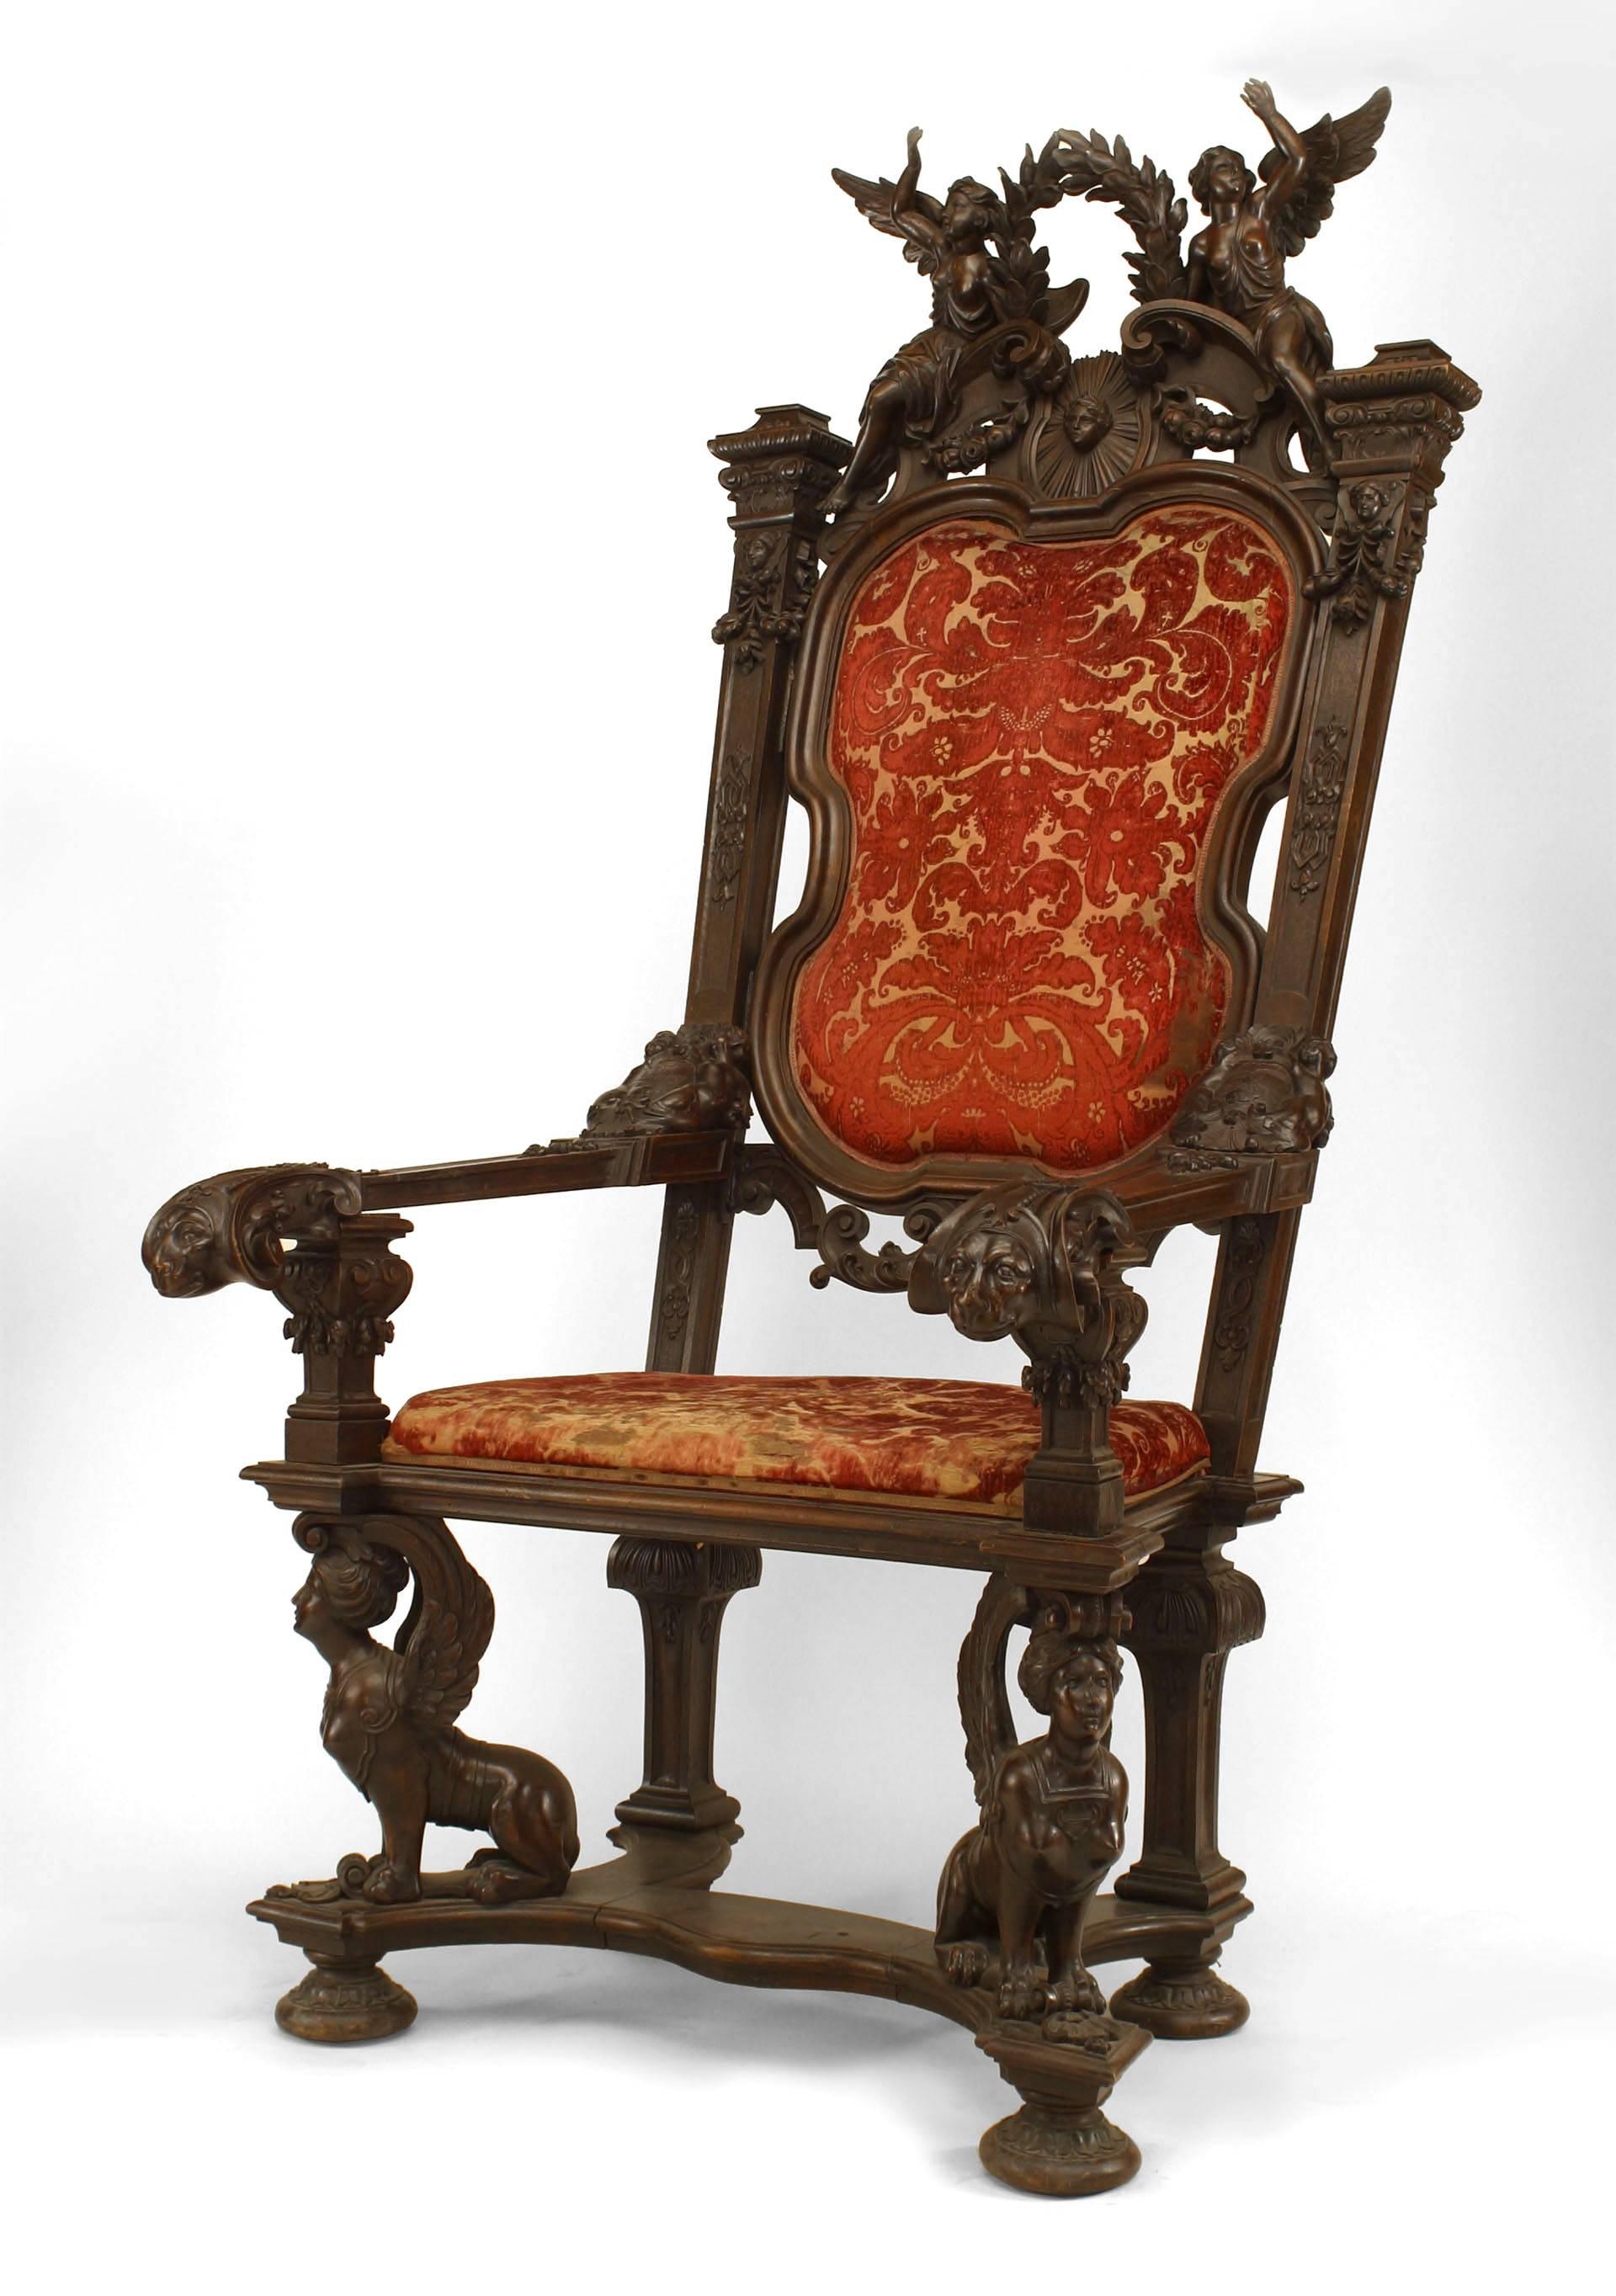 French Empire style (19th Cent) monumental walnut throne chair with carved figure with wreath and red cut velvet upholstery
